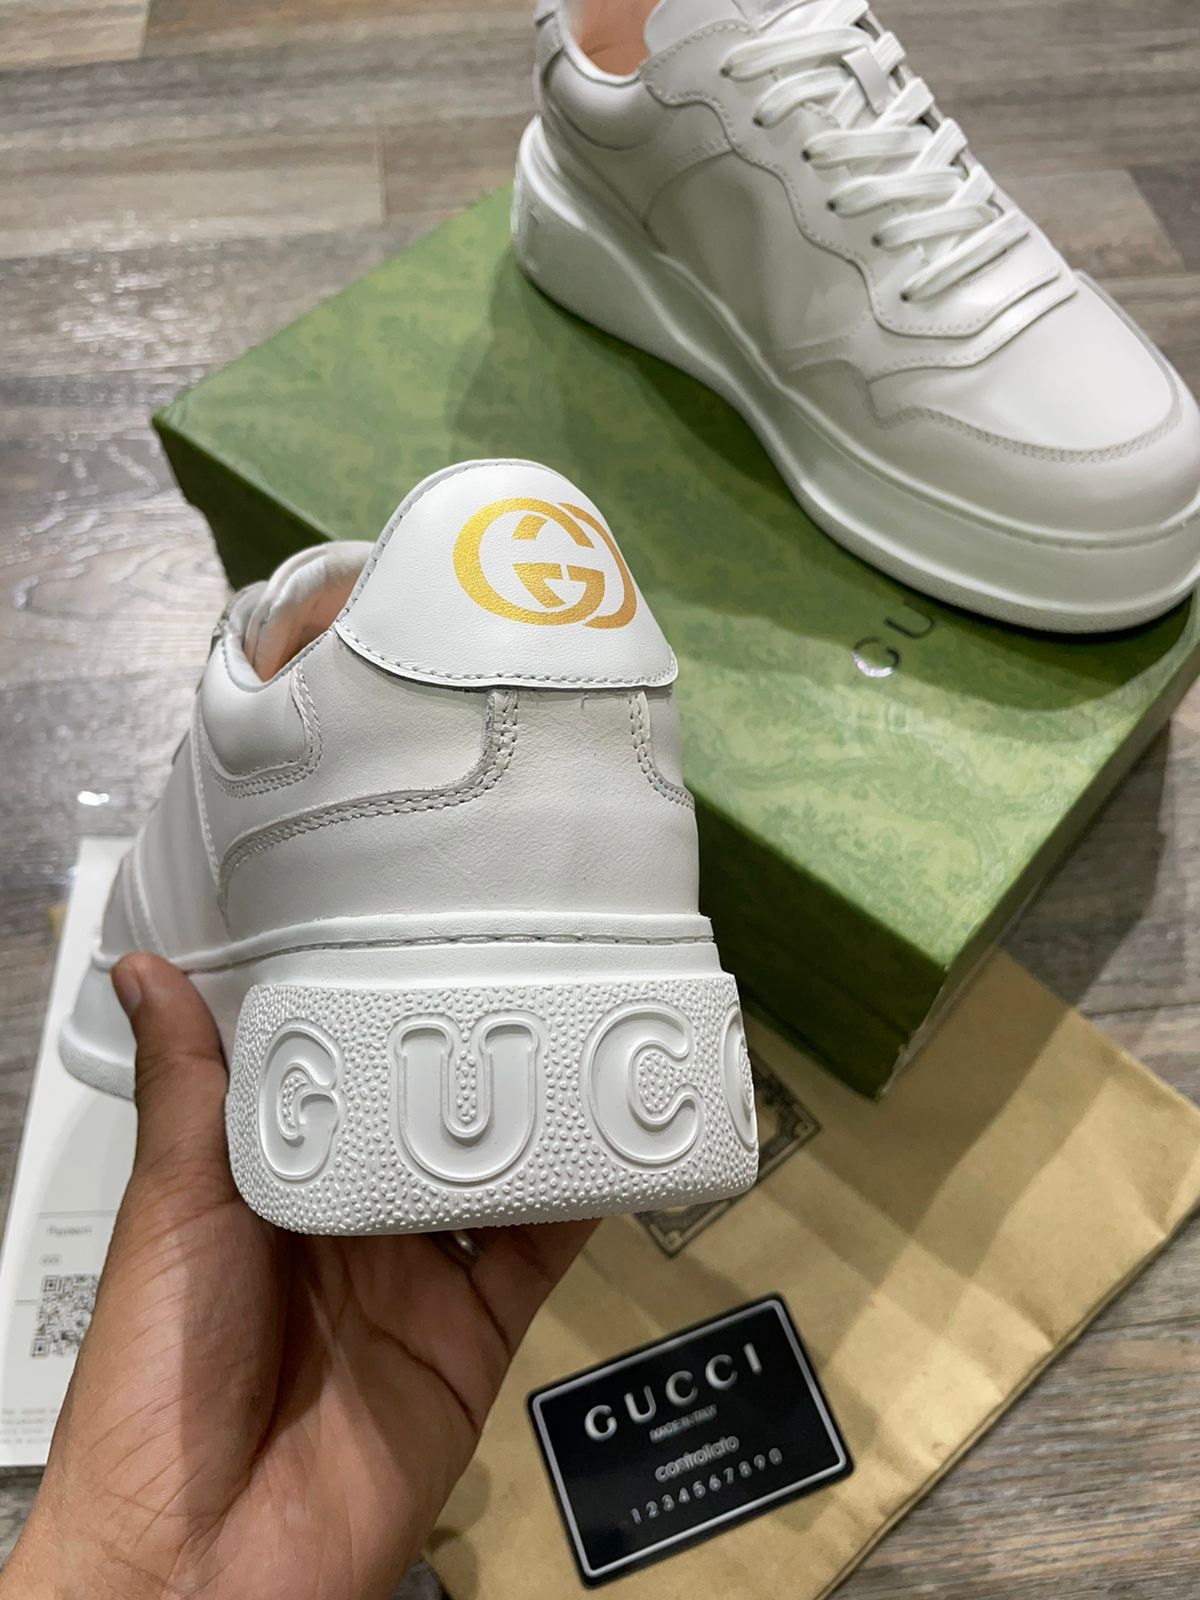 GUCCI RHYTON HEART-PRINT LEATHER TRAINERS SNEAKERS